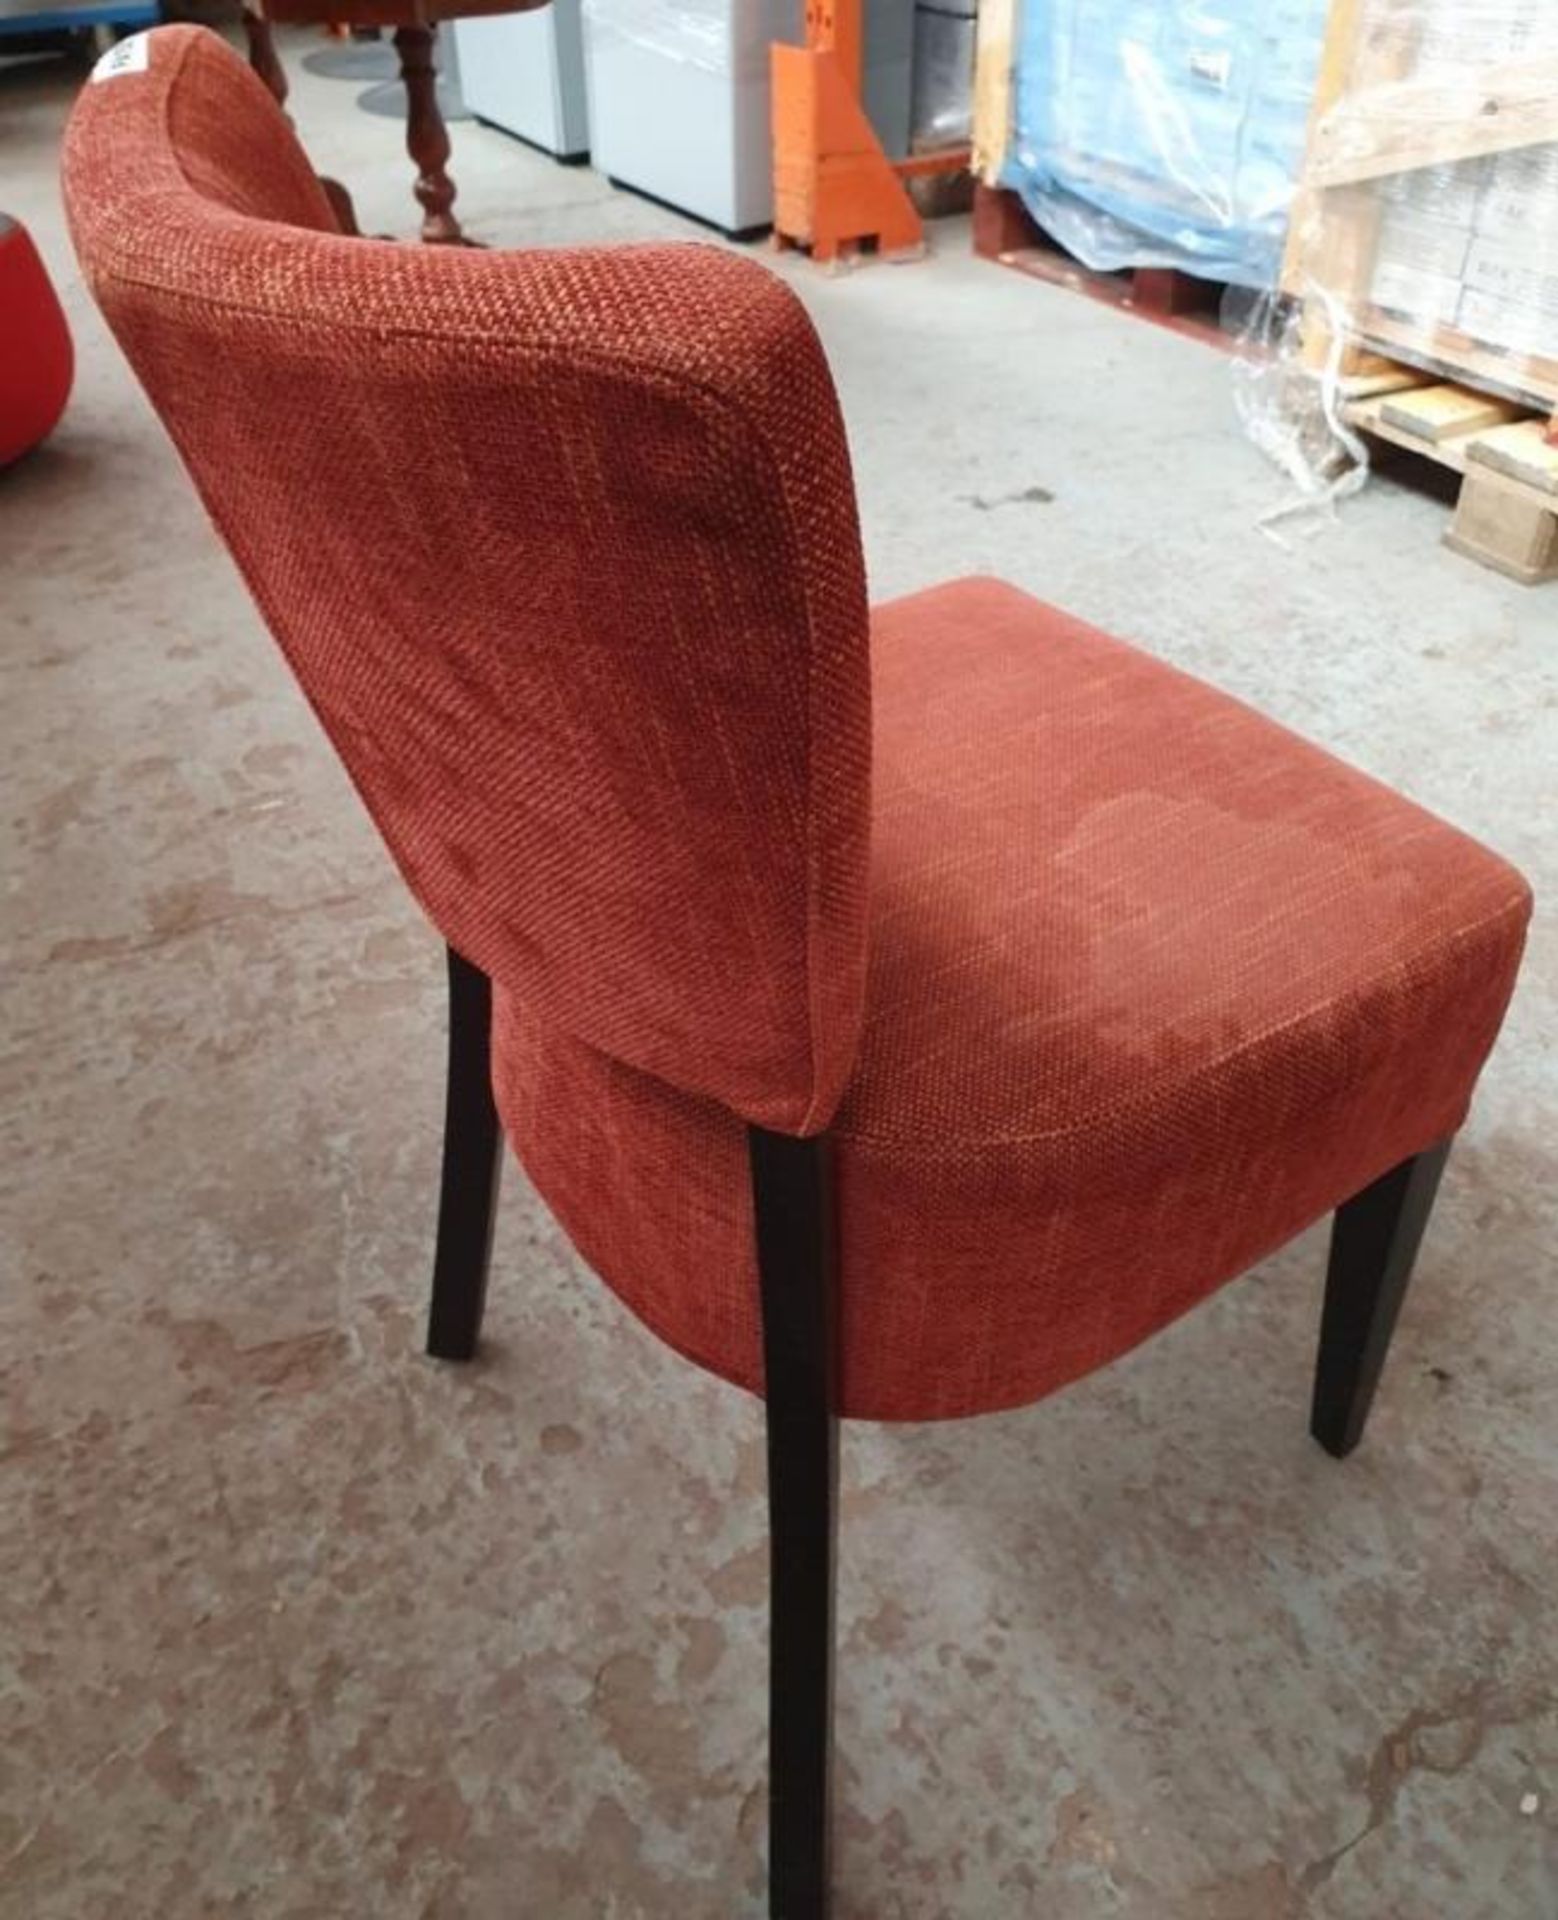 1 x Chair Upholstered in Salmon Fabric *£1 Start, No Reserve* - Image 3 of 4